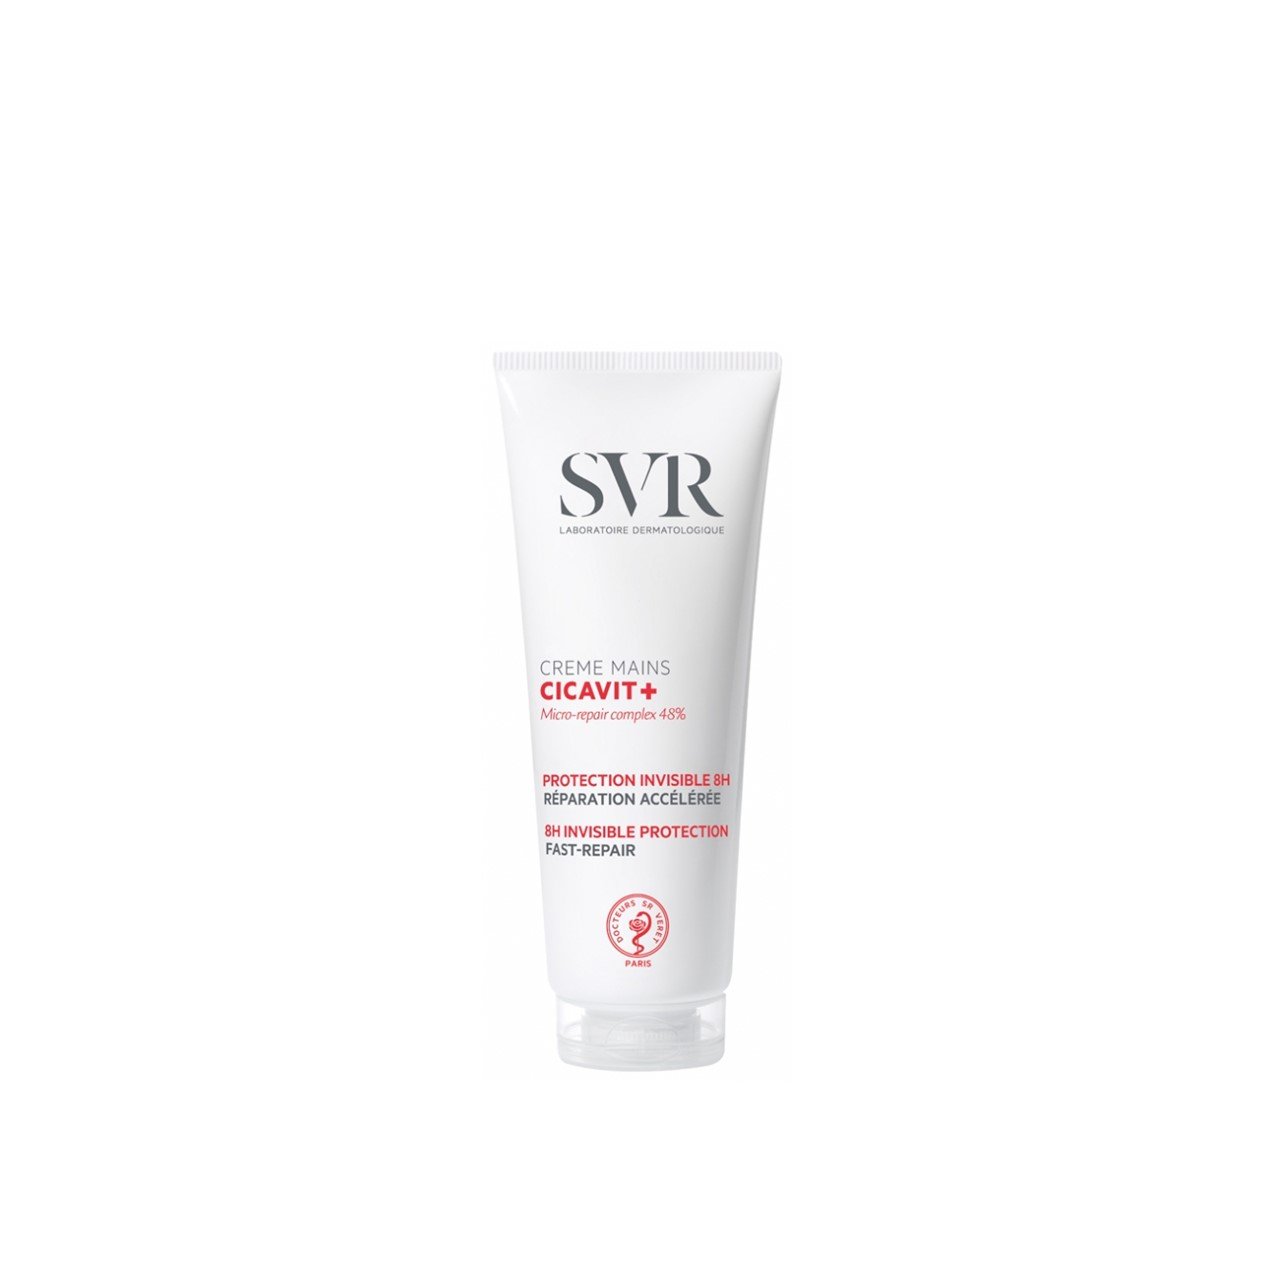 SVR Cicavit+ 8h Invisible Protection Fast-Repair Hand Cream 75g